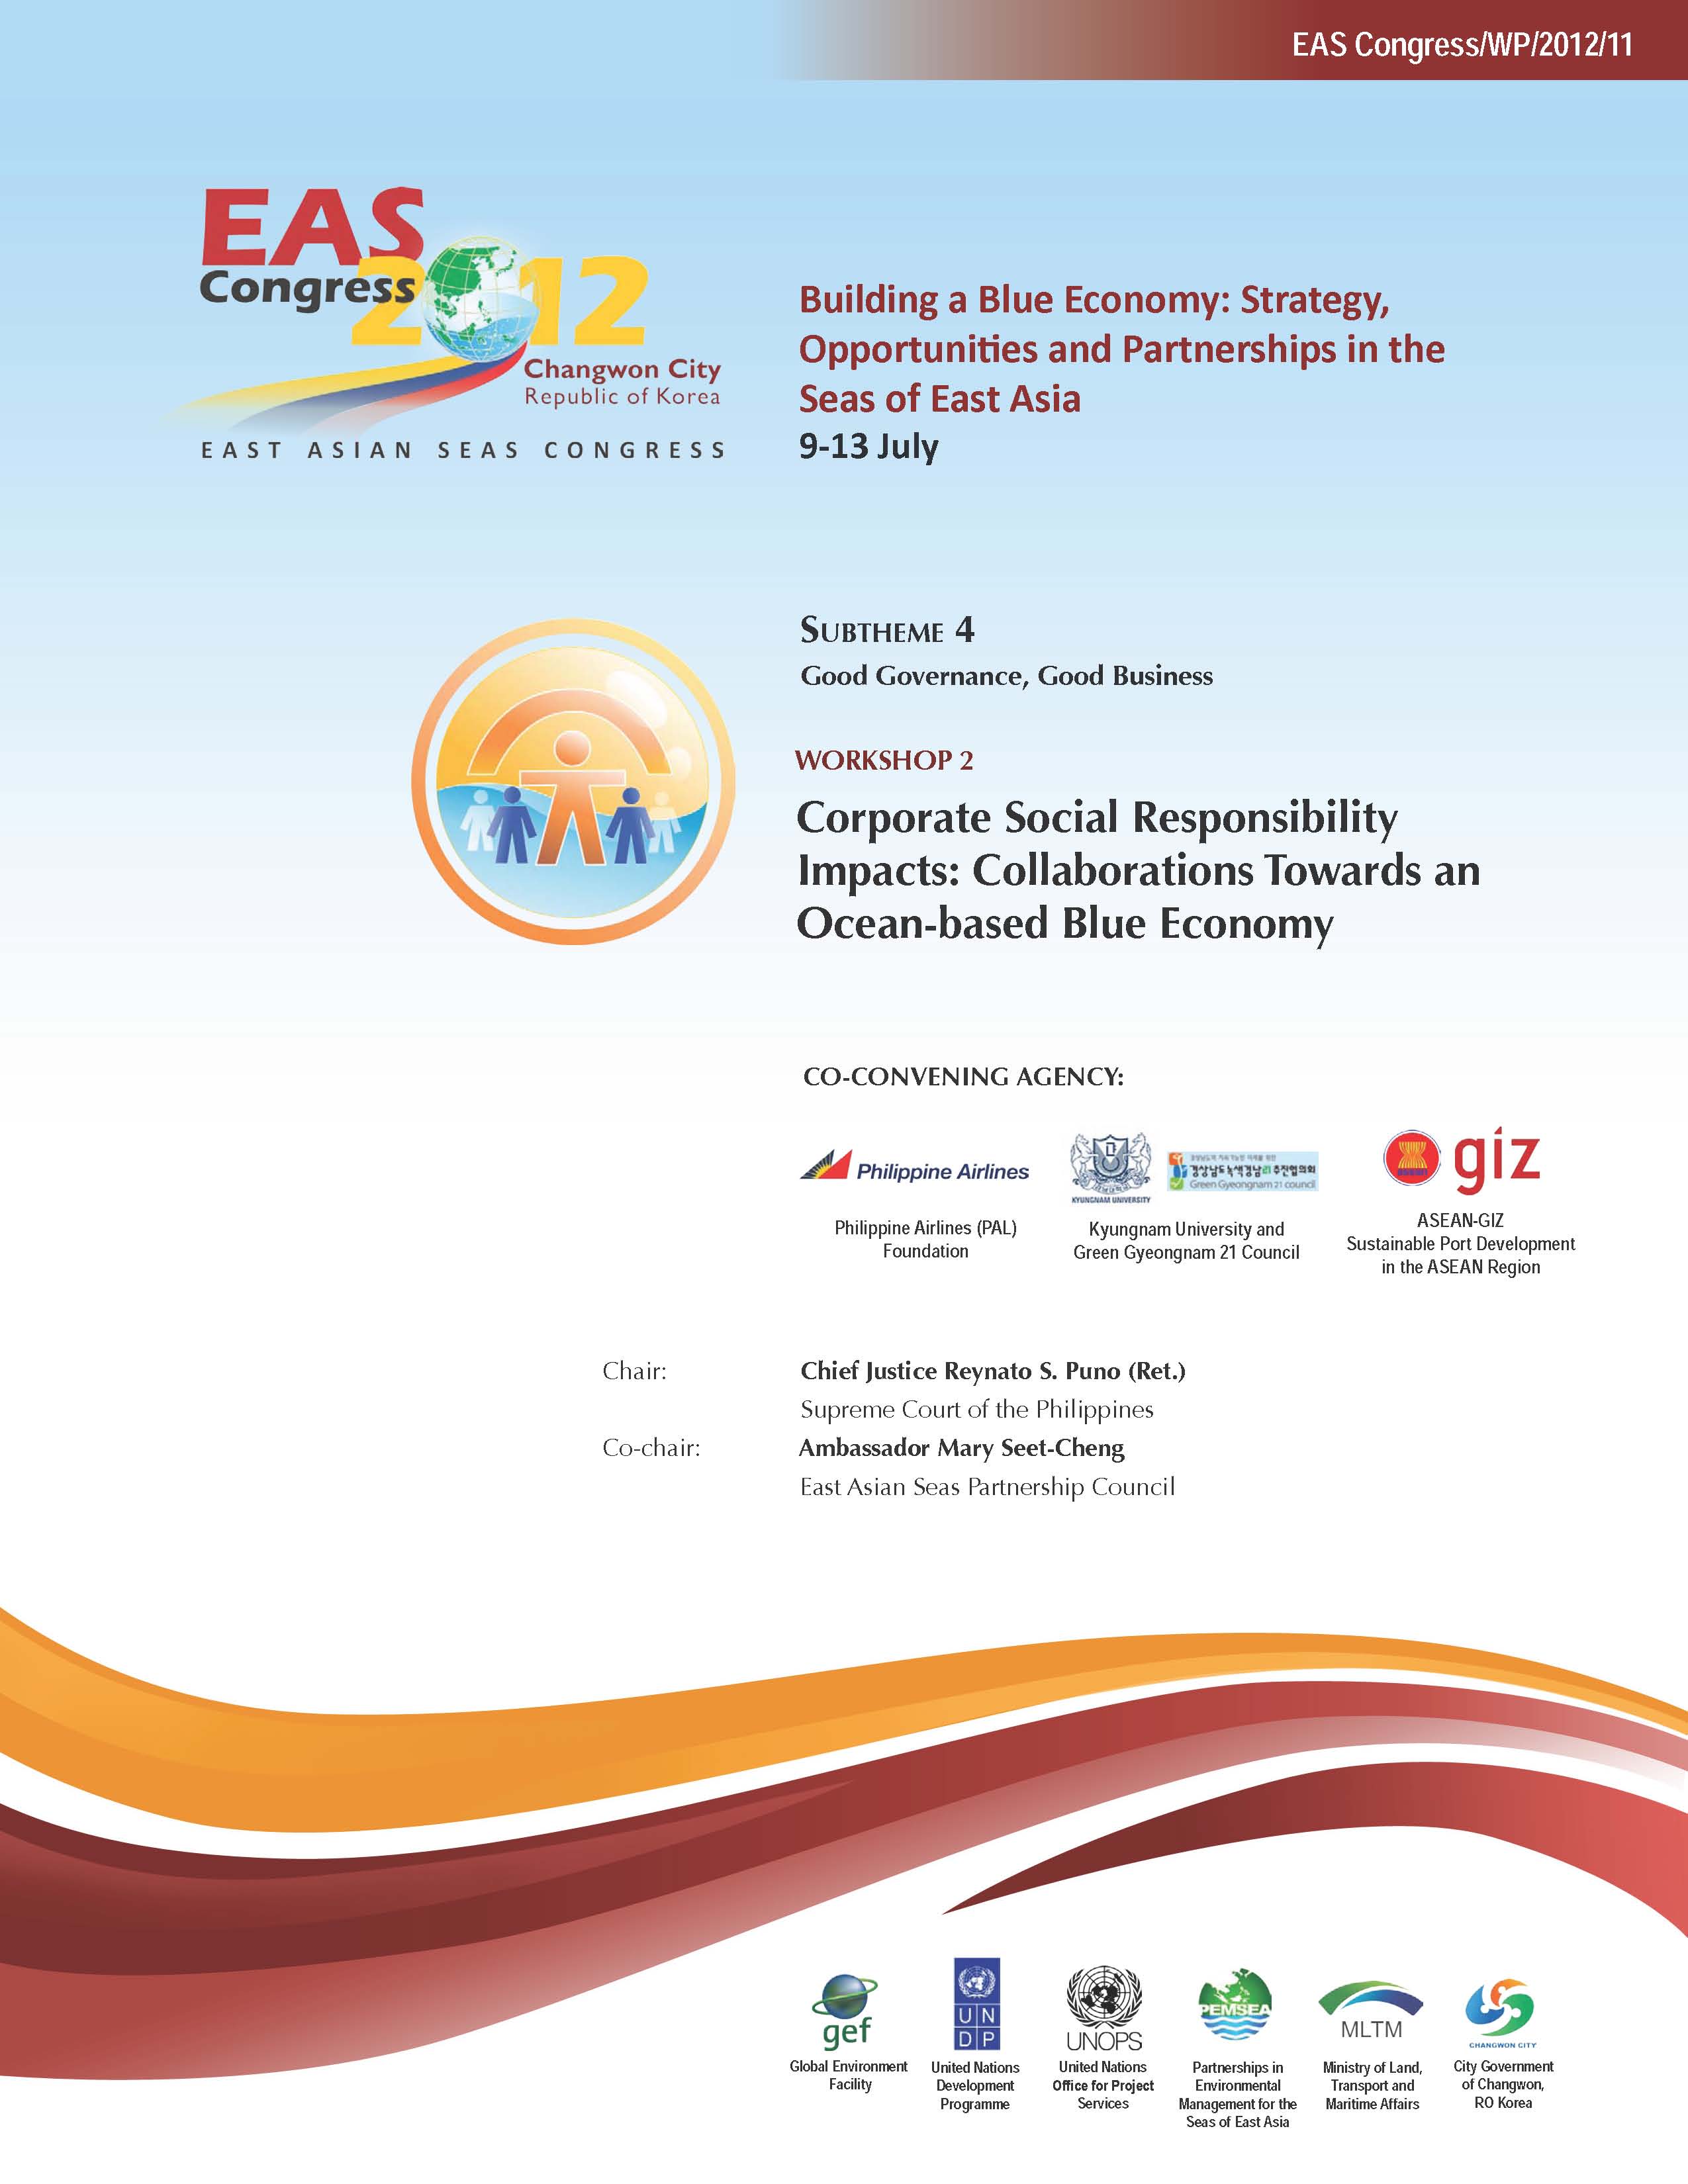 Proceedings of the Workshop on Corporate Social Responsibility Impacts Collaborations Towards an Ocean-based Blue Economy